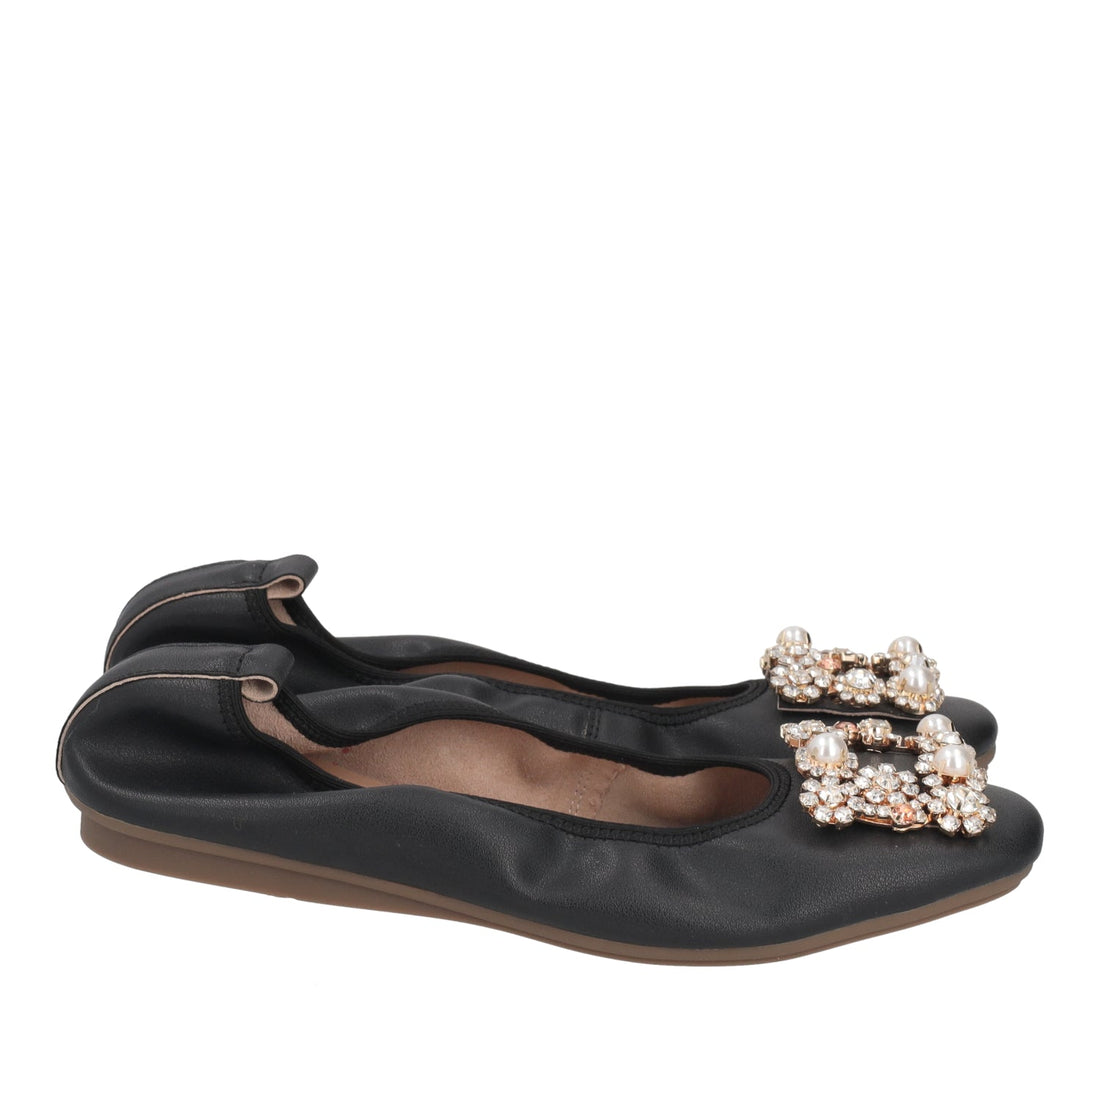 BLACK BETTY BALLERINA SHOES WITH JEWEL ACCESSORY